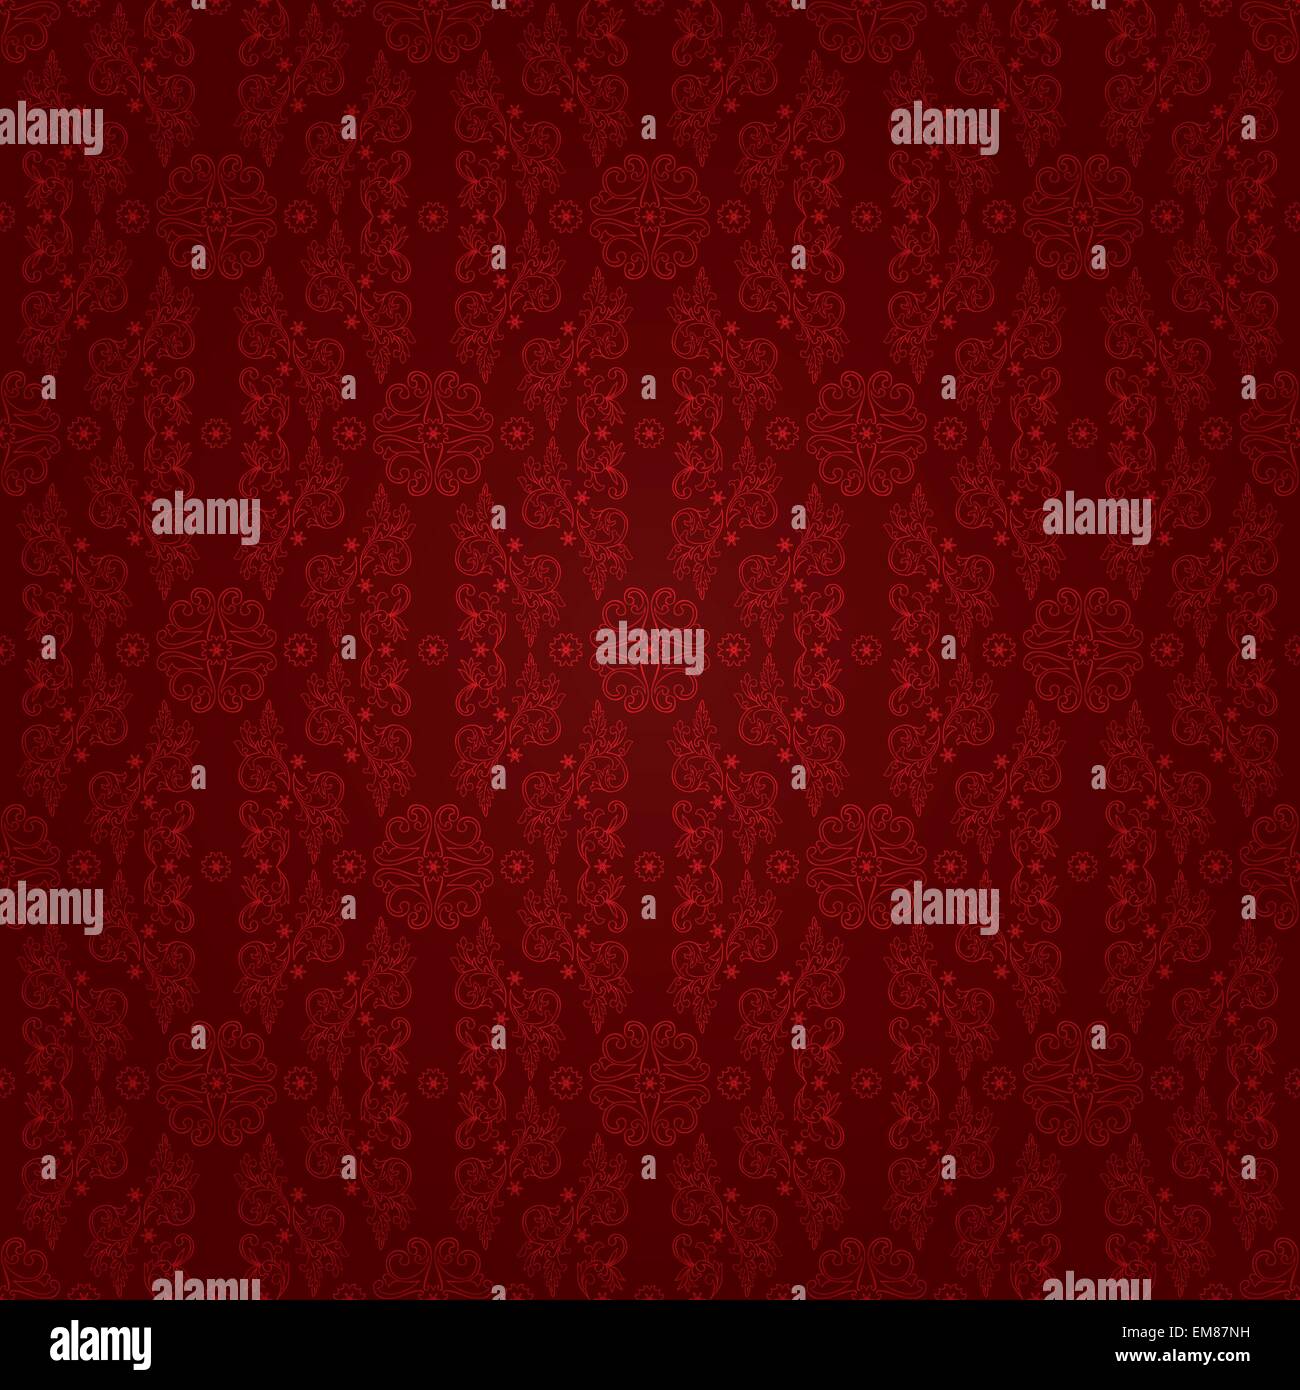 Vintage floral seamless pattern on red Stock Vector